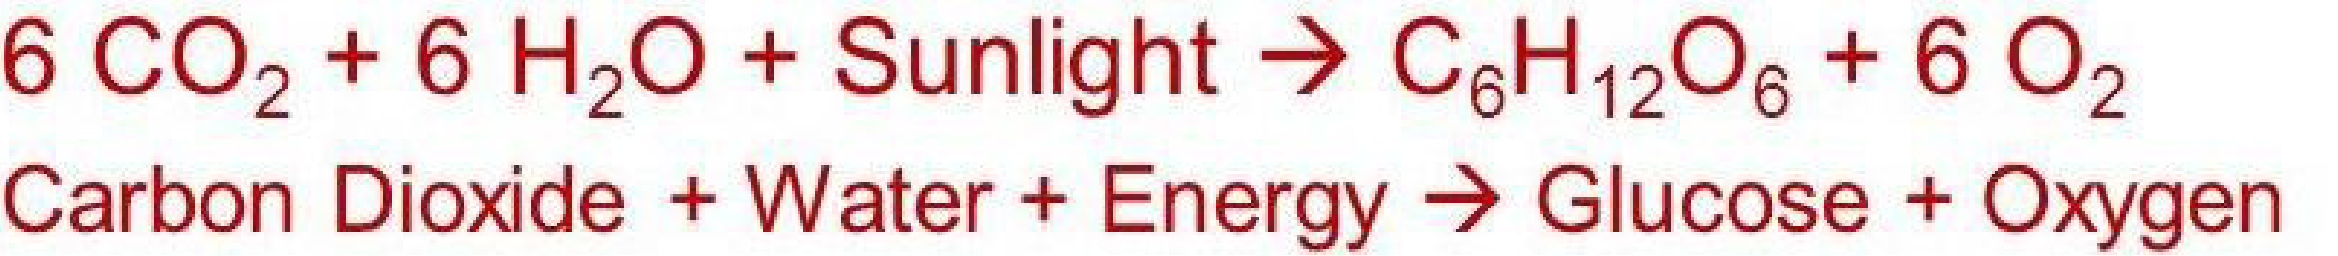 <p>photosynthesis- <span style="font-family: sans-serif">Harvesting of light energy and conversion into a usable chemical form of energy (glucose) = CONVERSION and STORAGE of energy. </span></p>